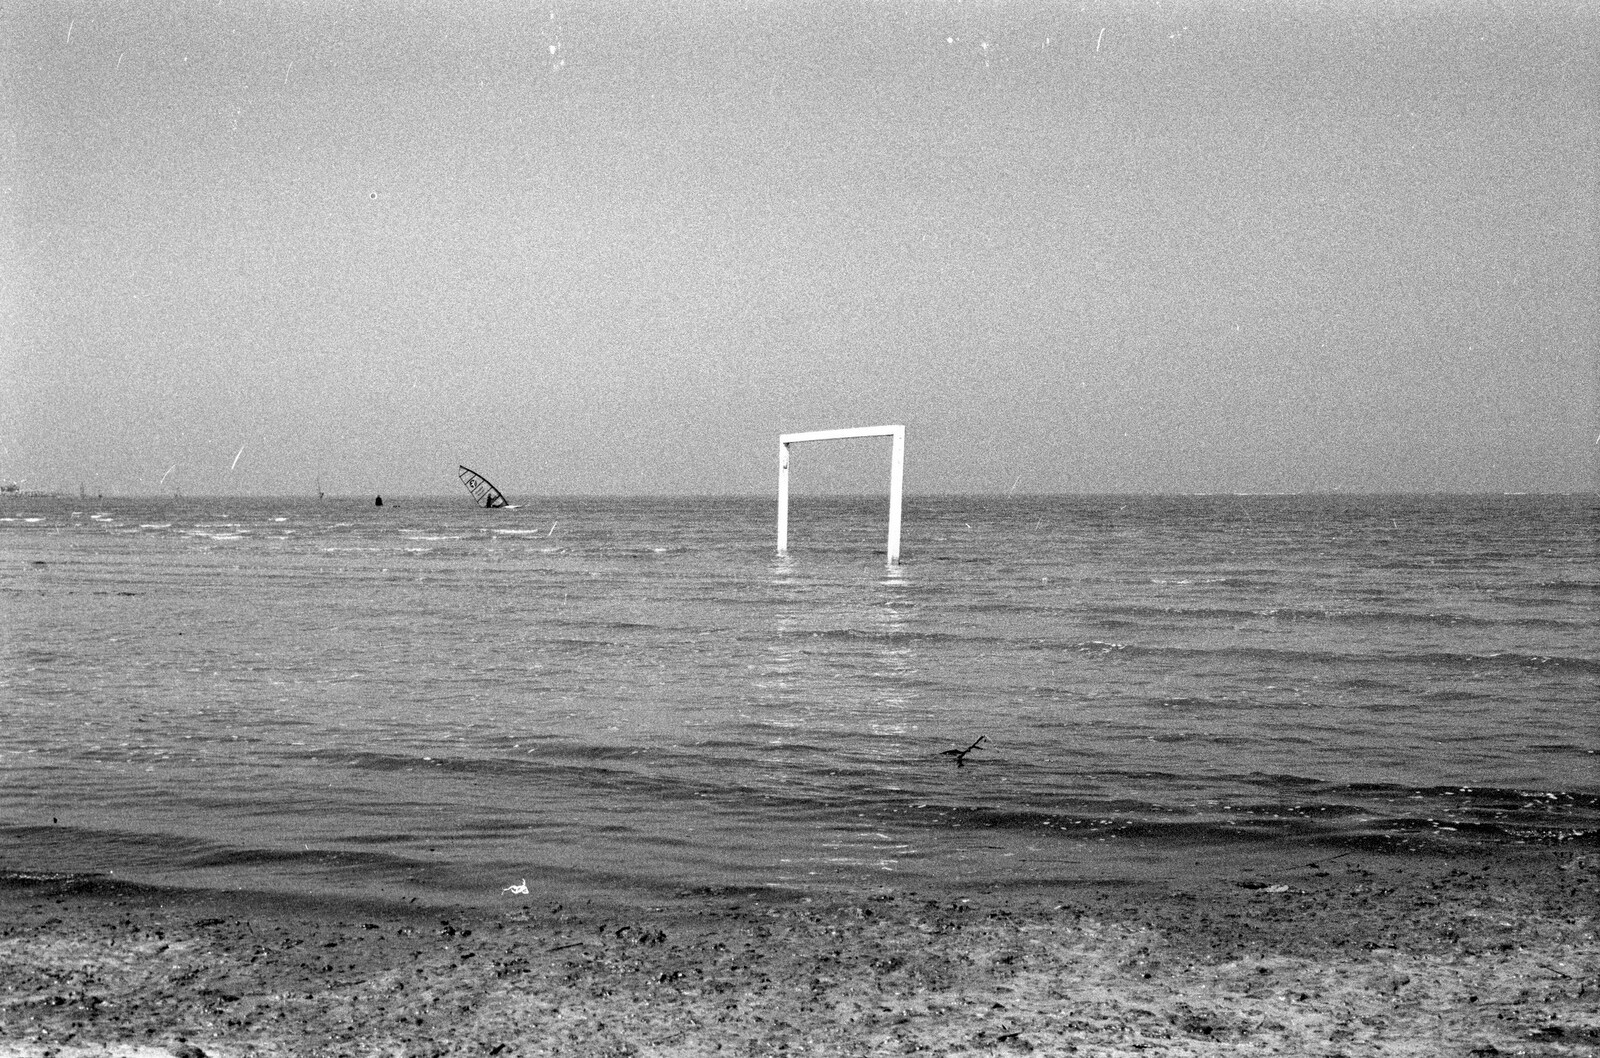 A goalpost in the sea from A BSCC Bike Ride to Gravelines, Pas de Calais, France - 11th May 2000